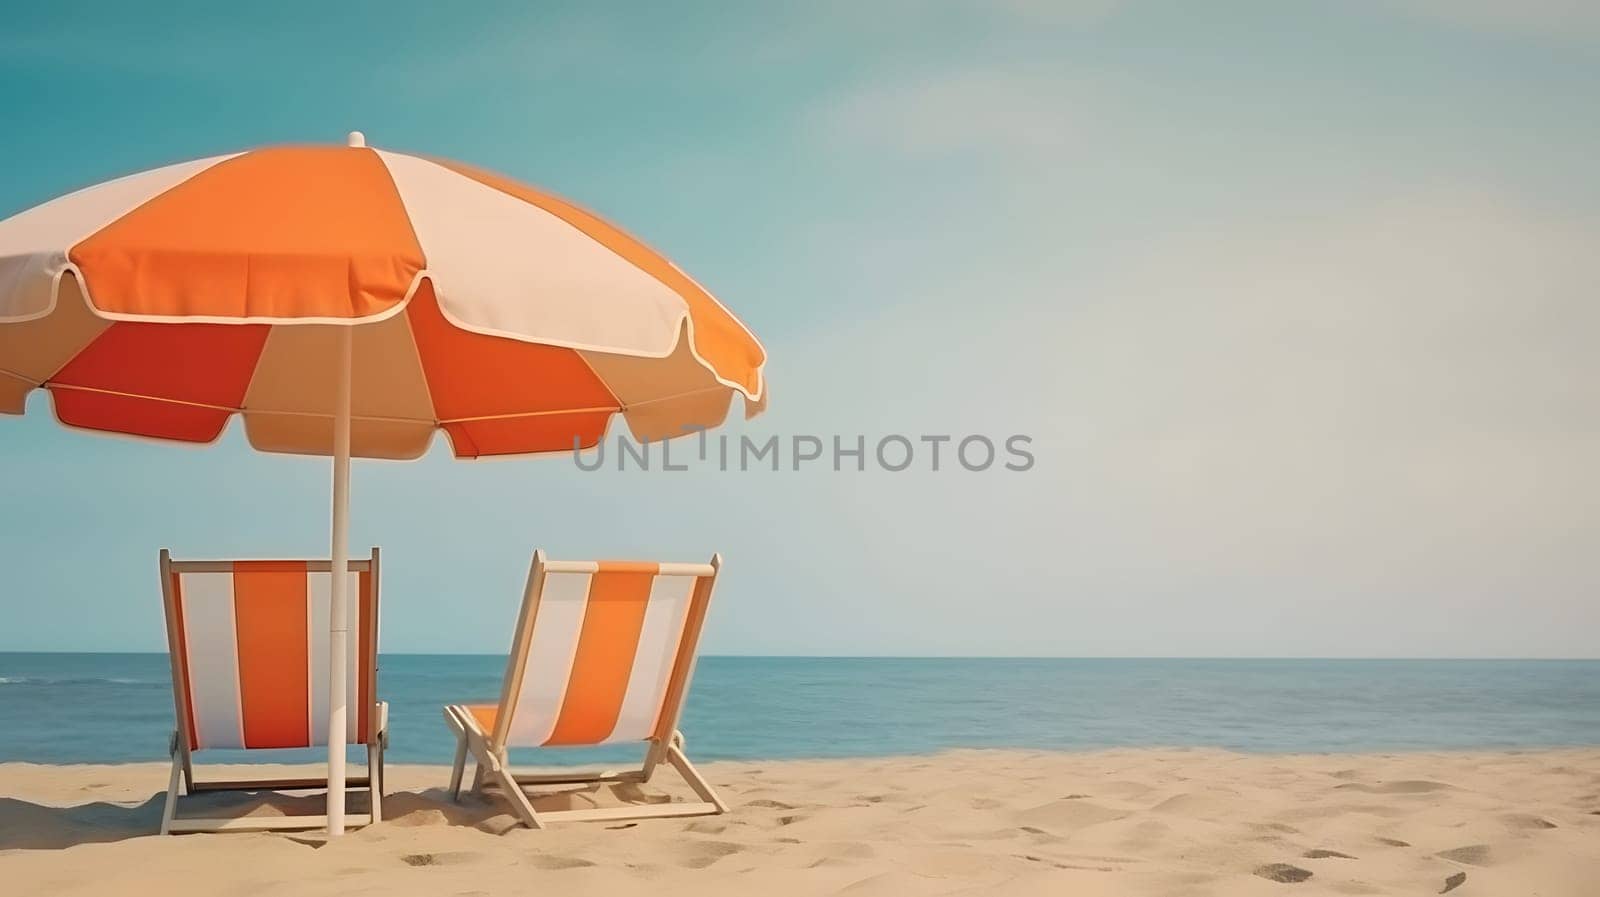 Orange beach umbrella with chairs on the sand beach - summer vacation theme header, neural network generated art by z1b